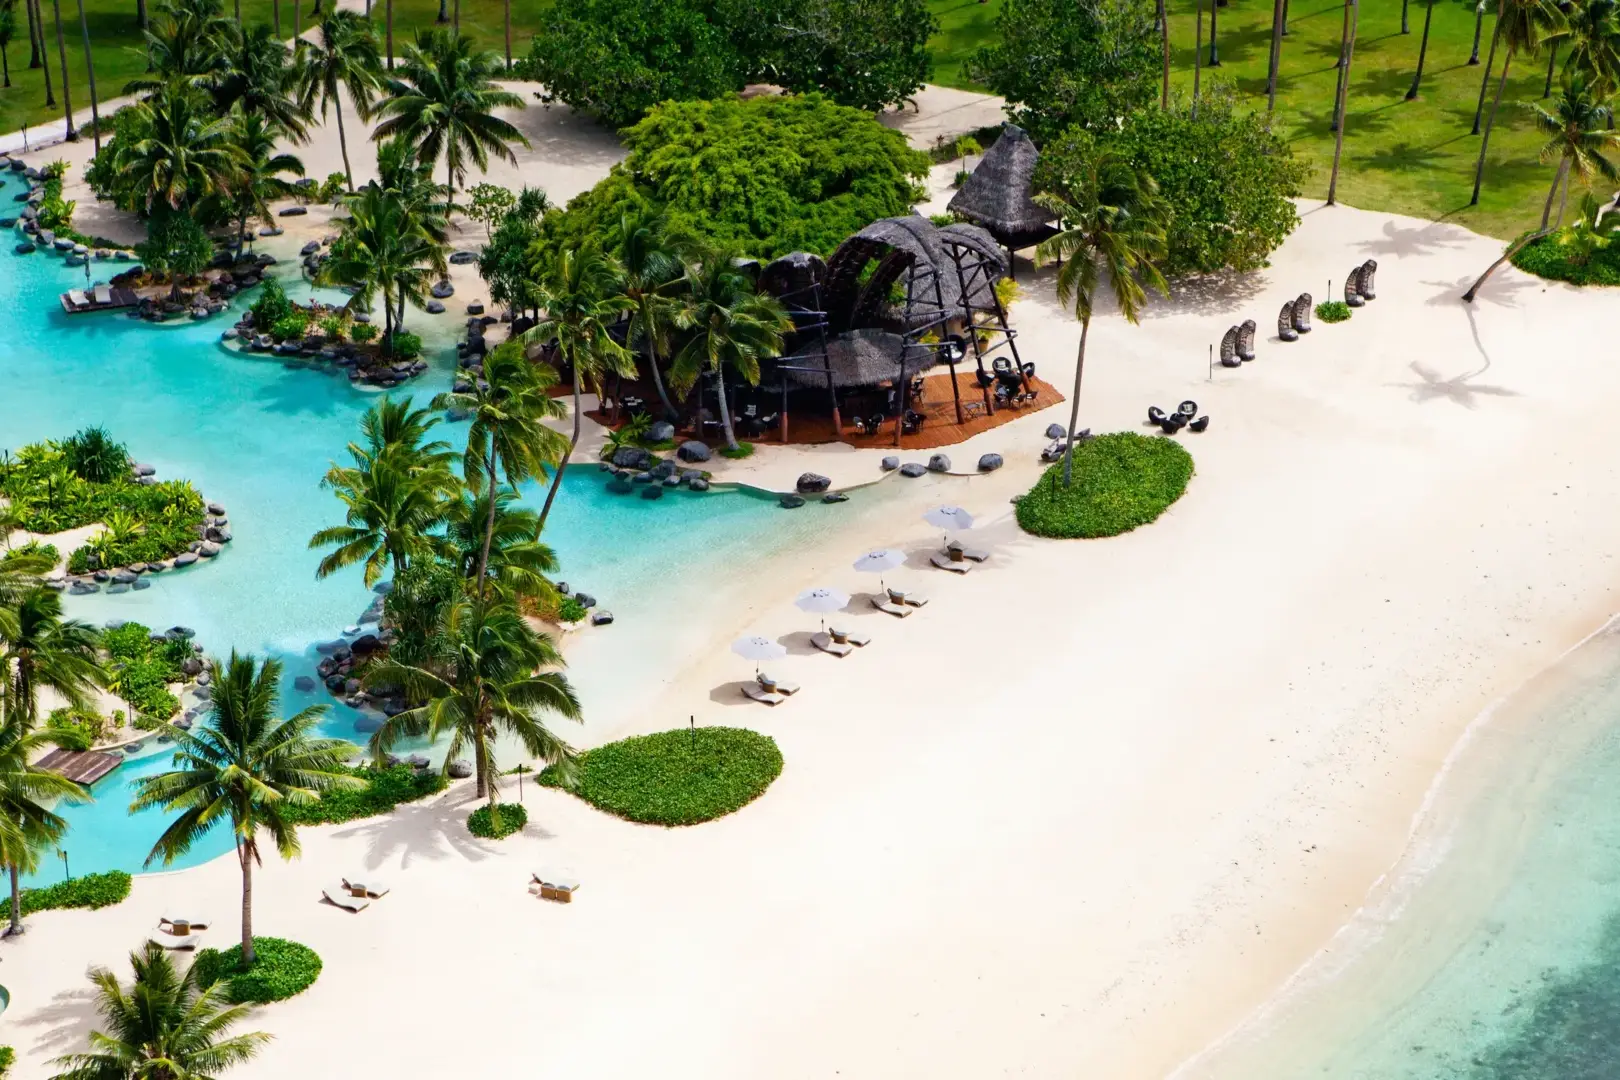 An aerial view of a beach resort with palm trees.